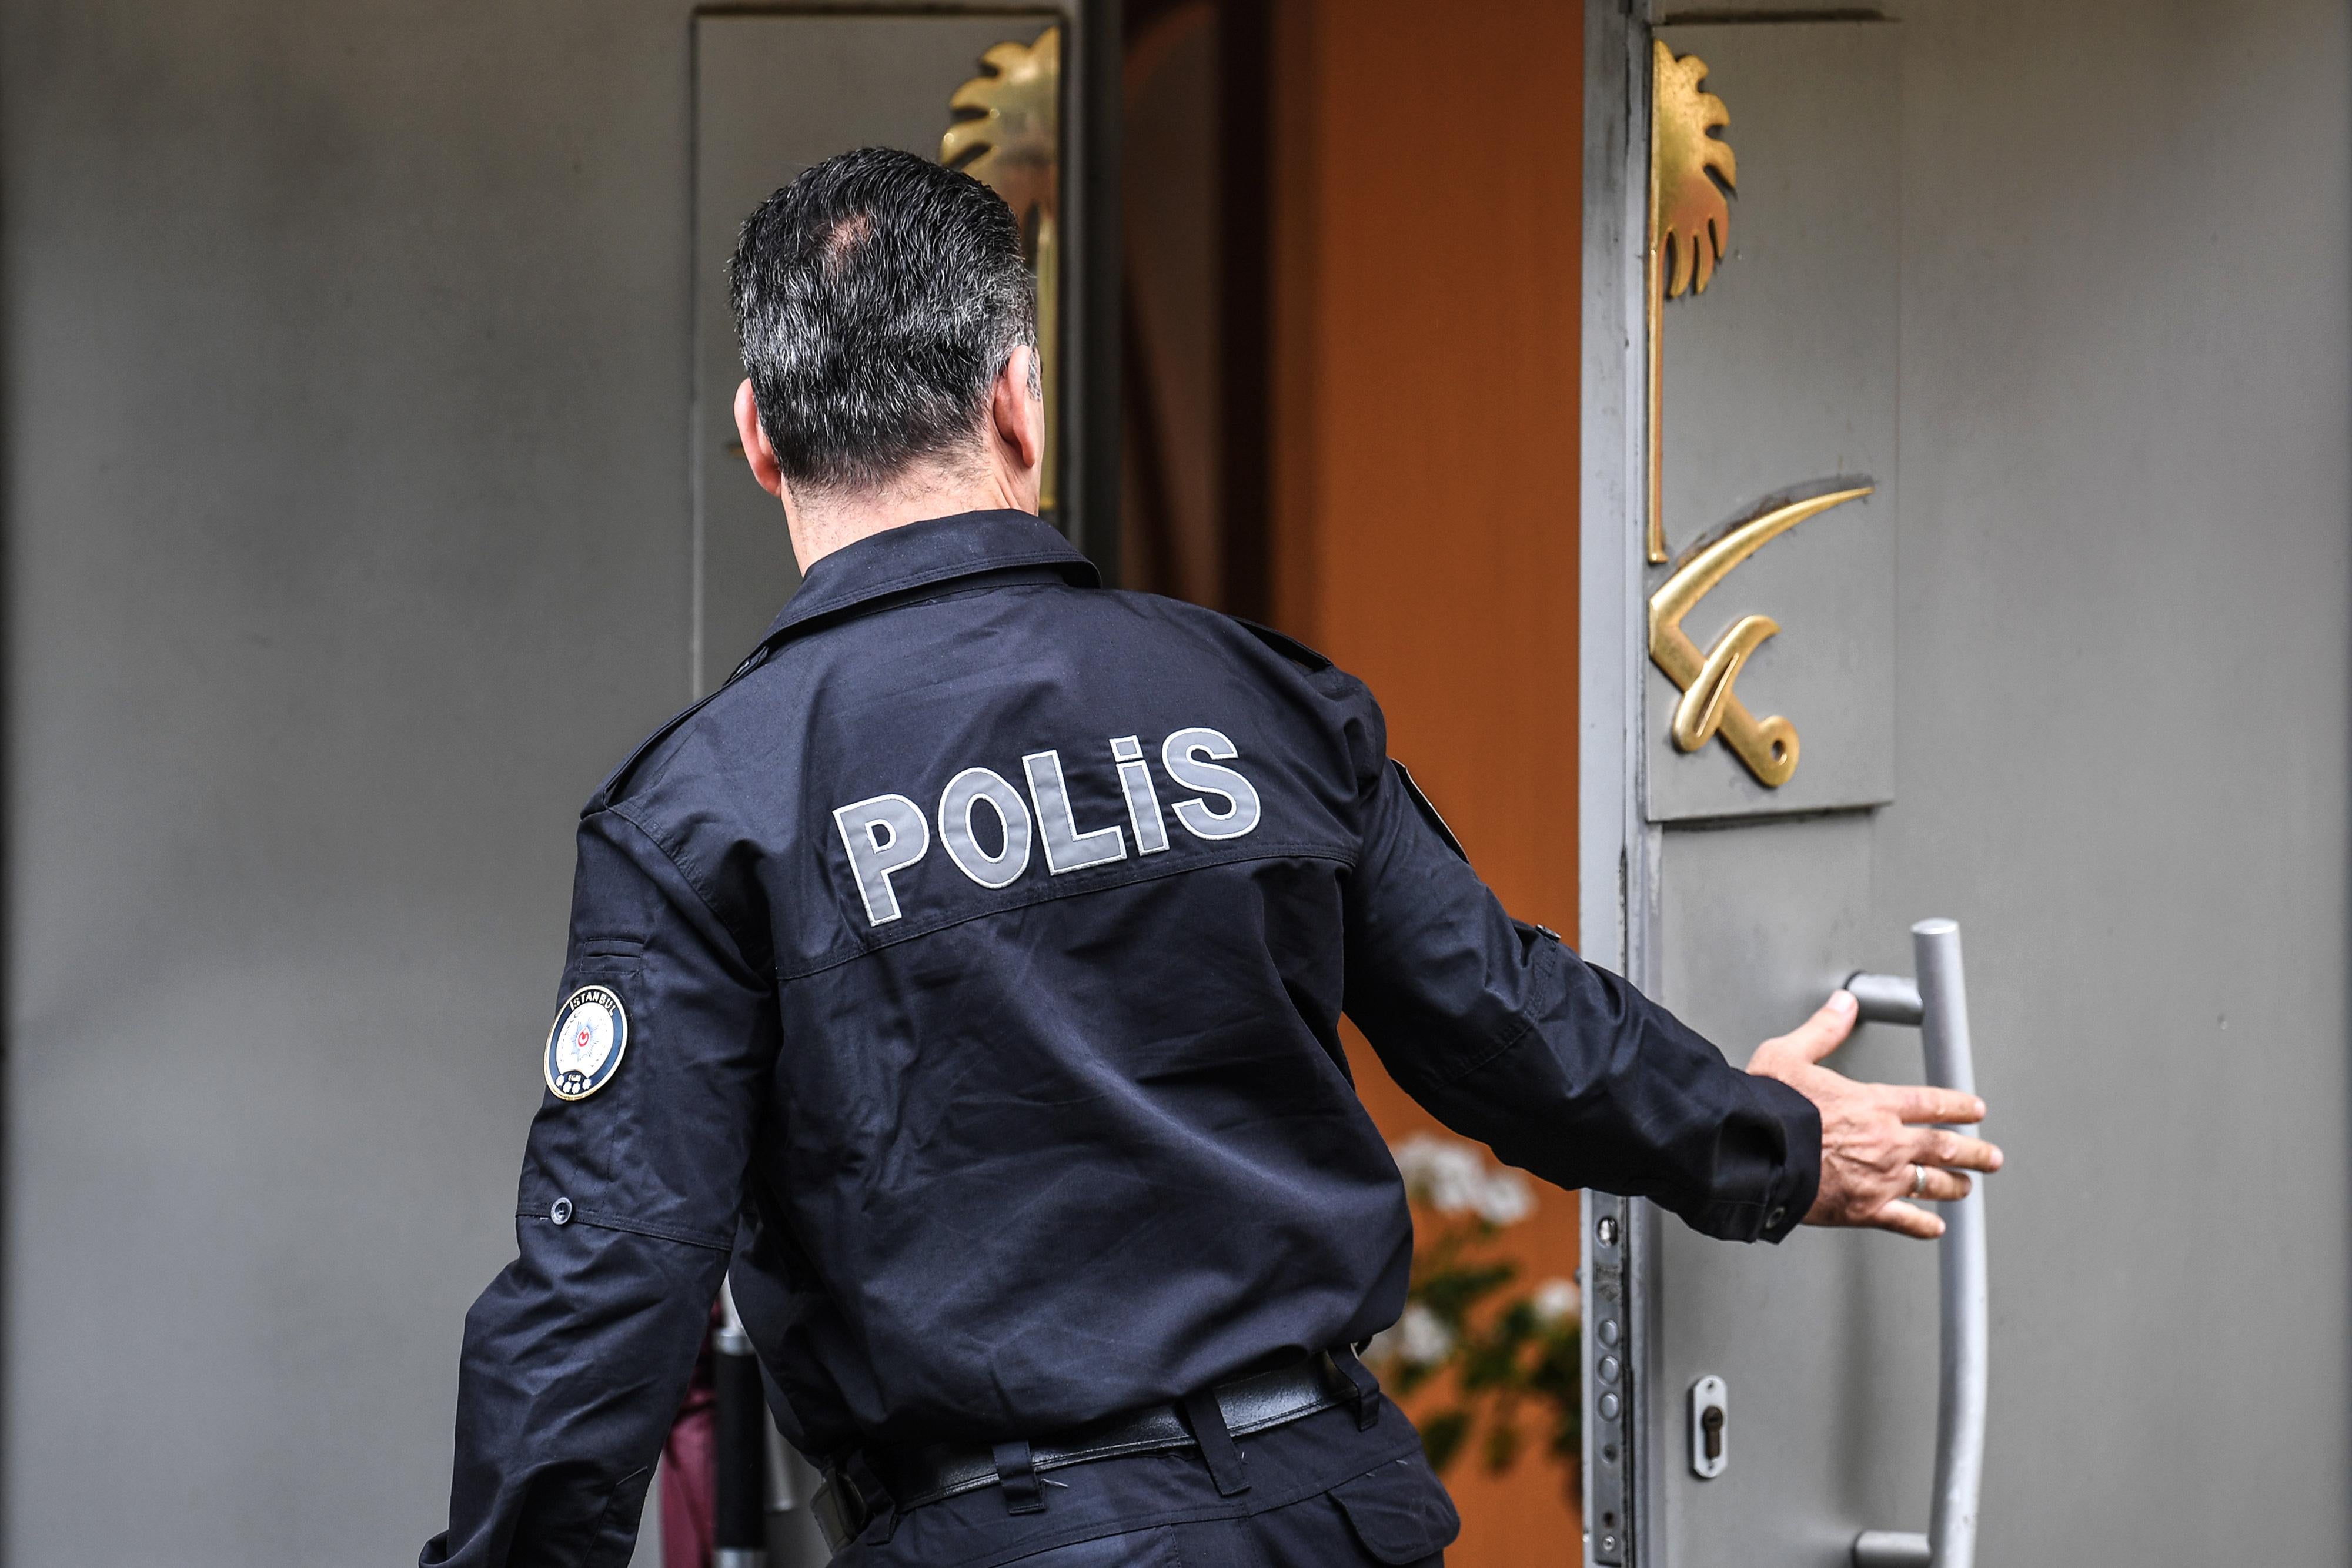 A Turkish policeman stands in front of the door at the Saudi consulate in Istanbul.